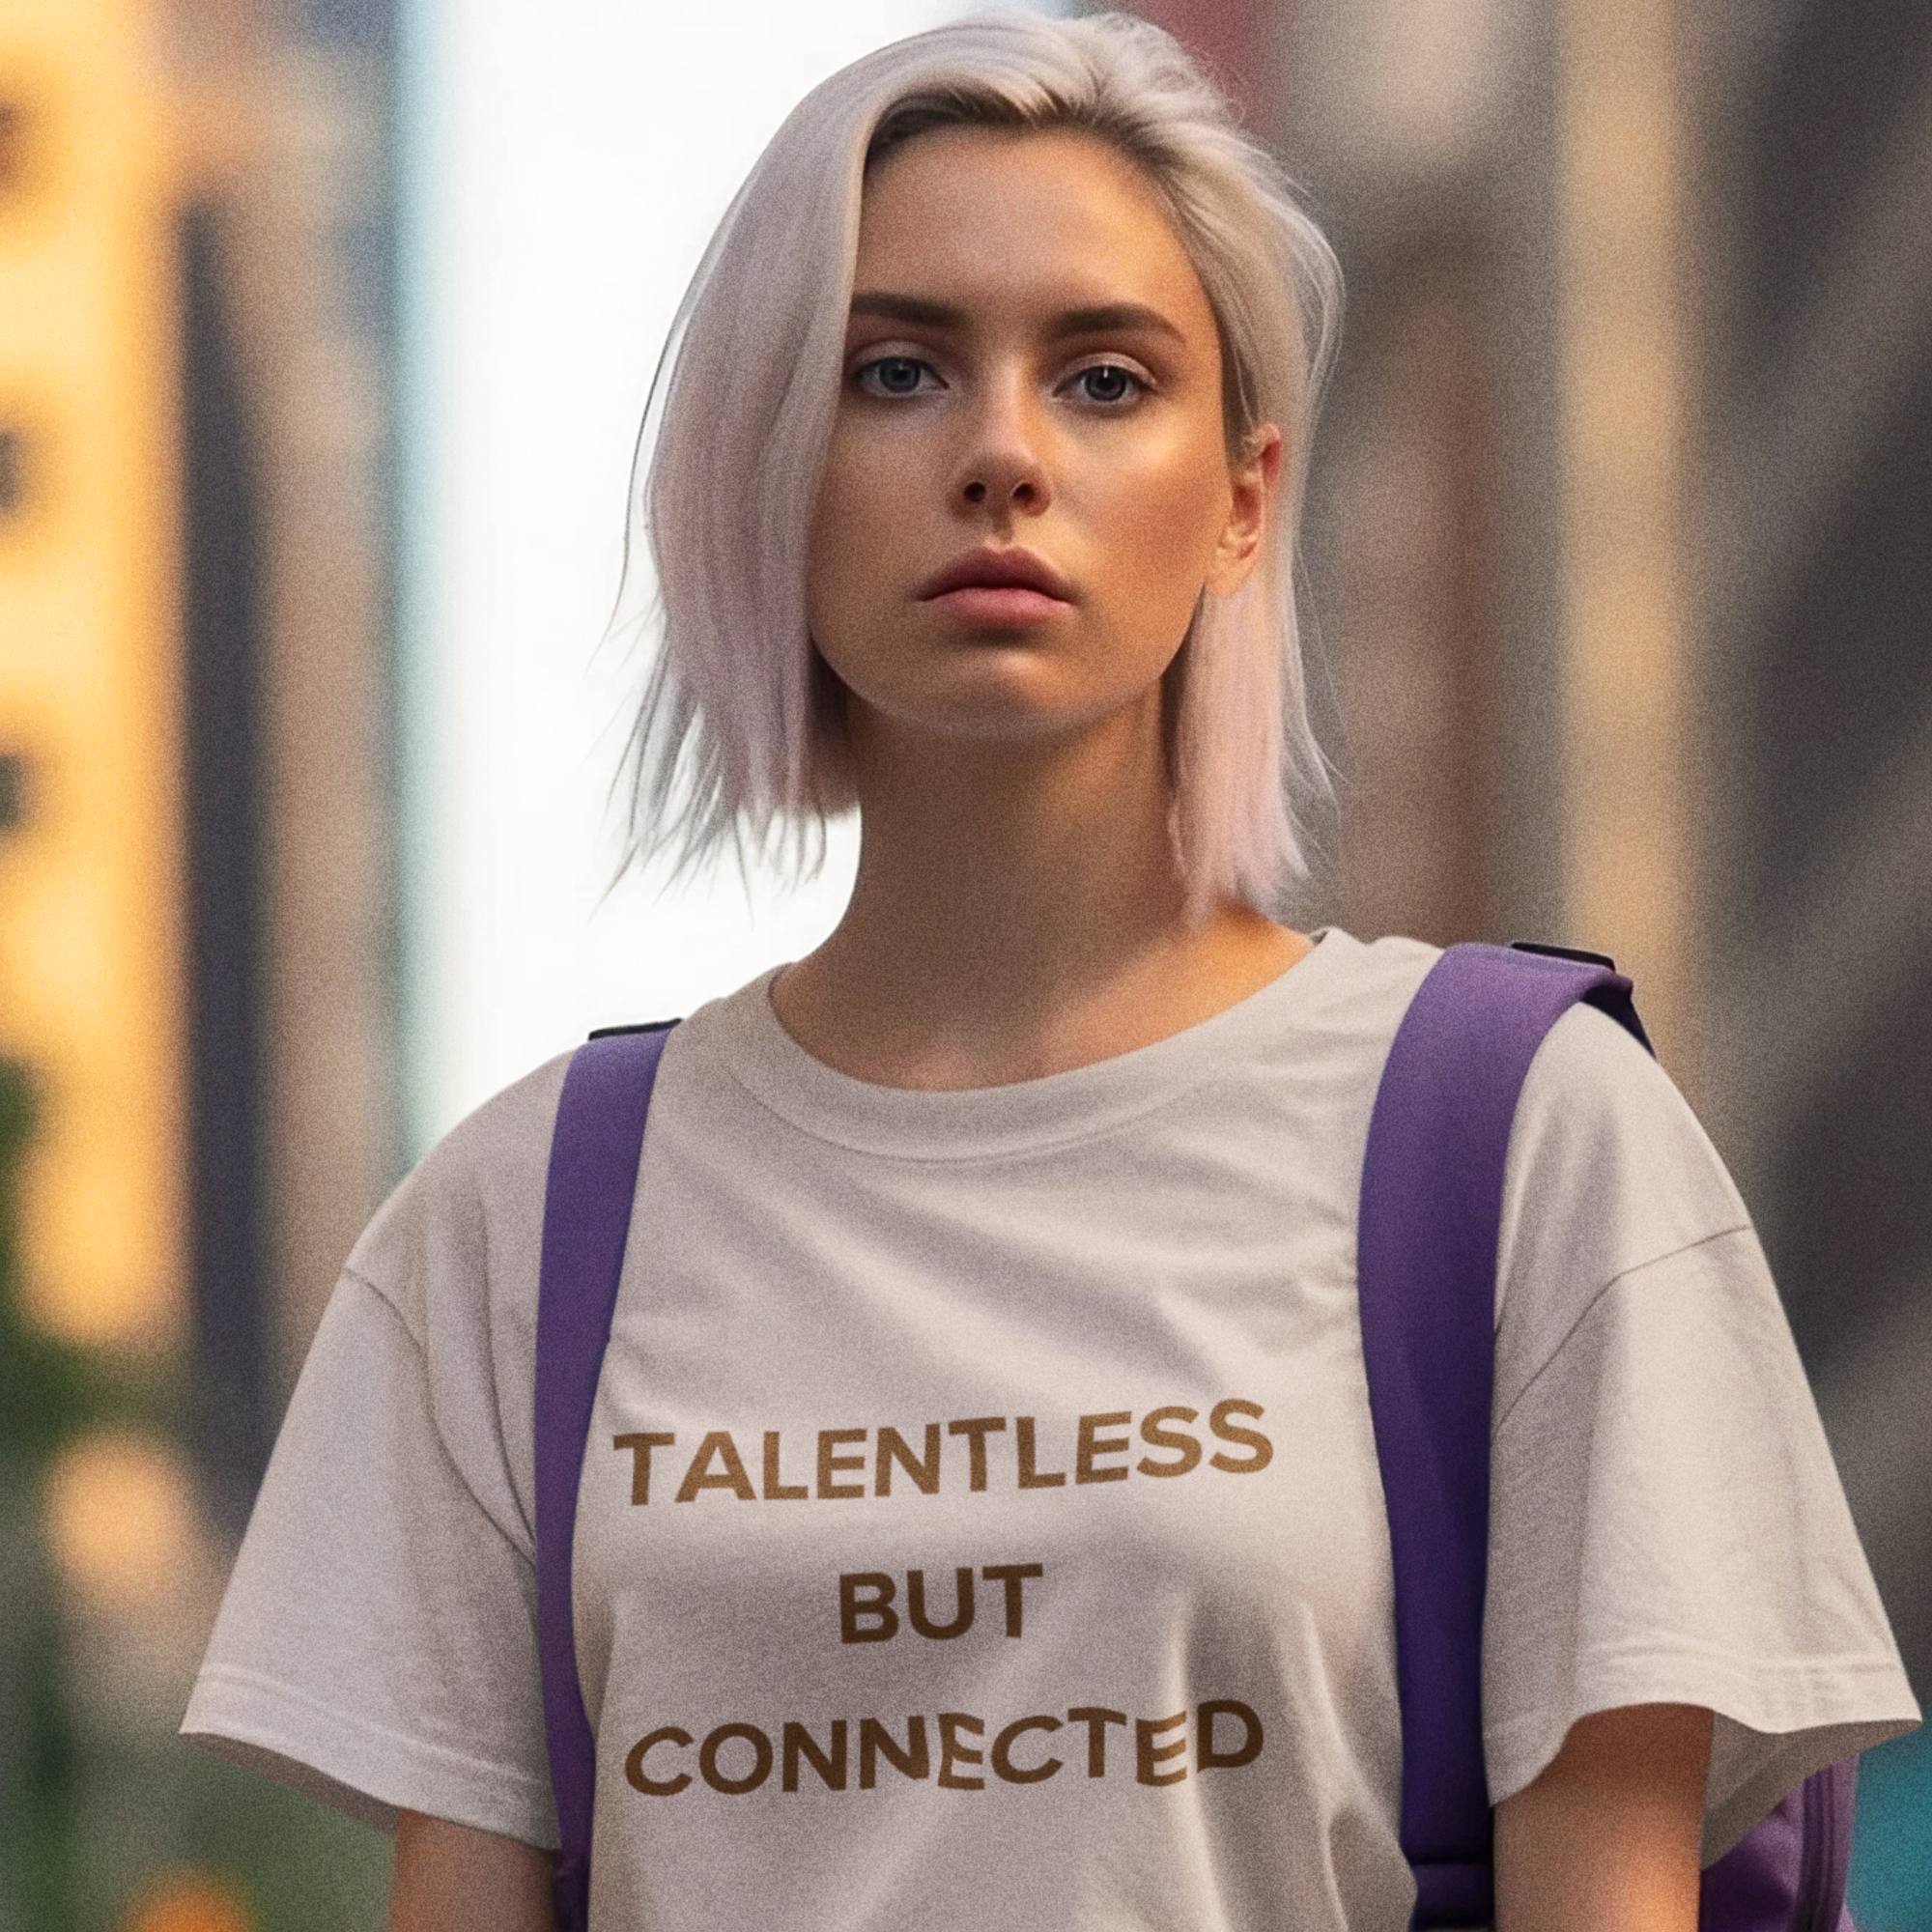 Talentless but connected